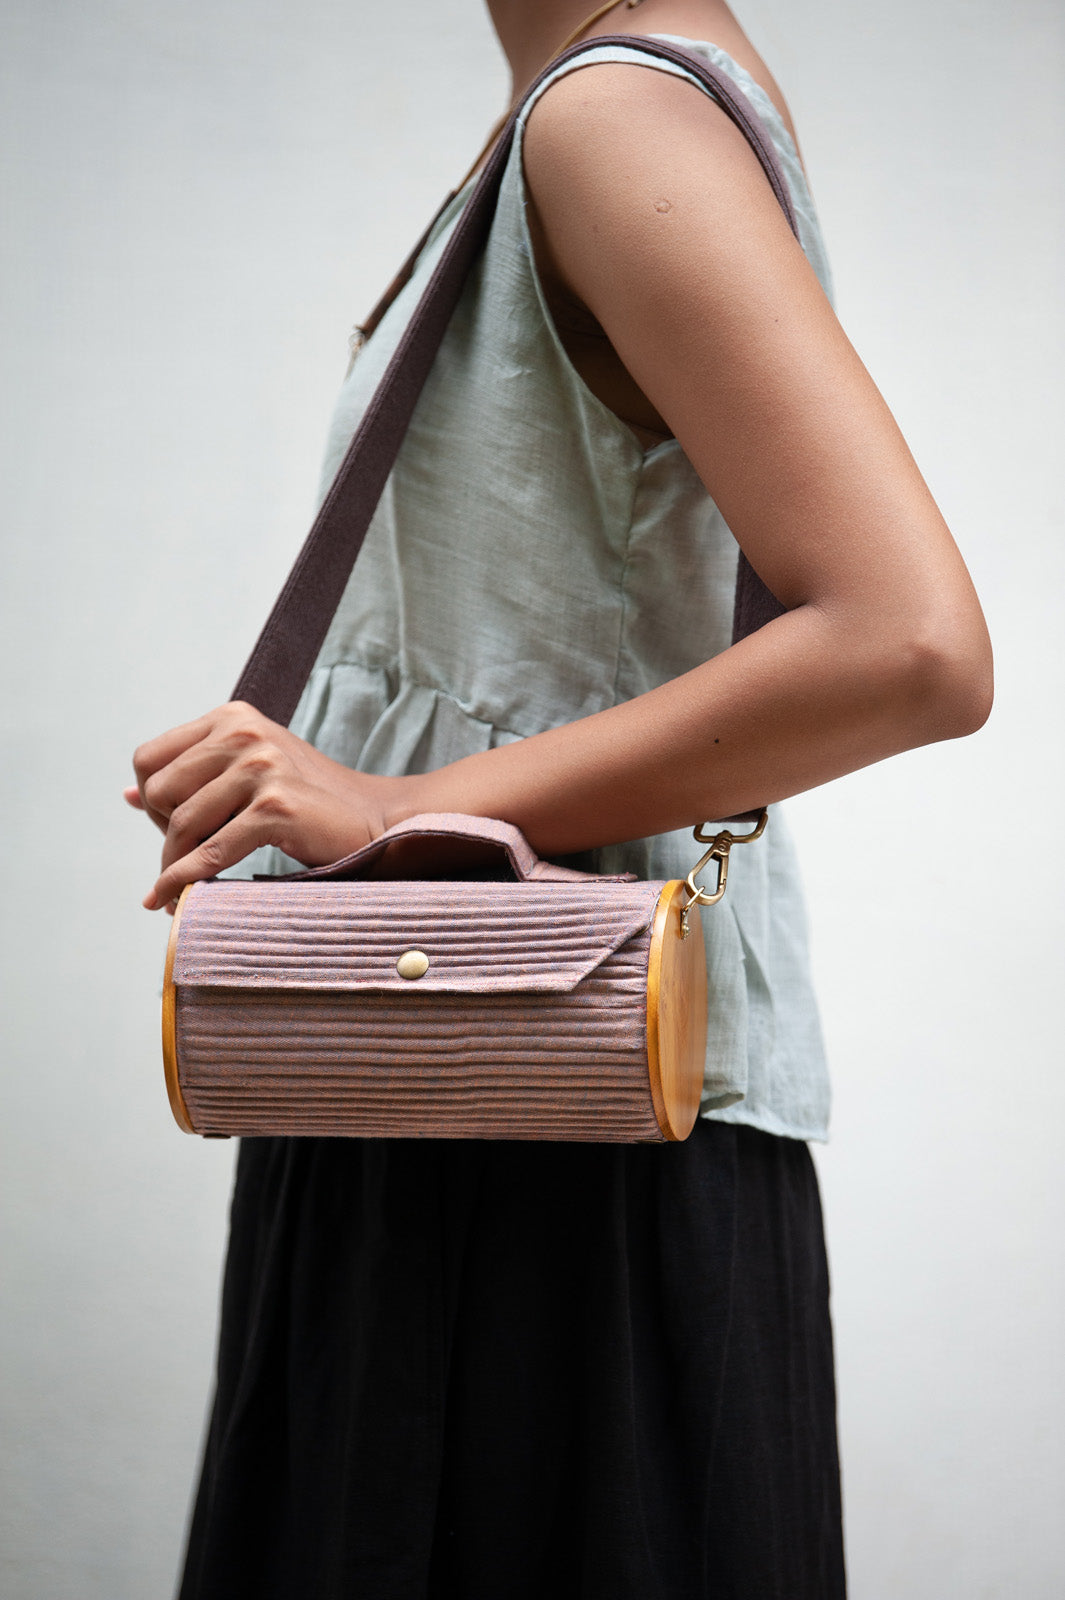 100% handcrafted round clutch comes with 1 detachable sleeve - in a solid mauve shade.